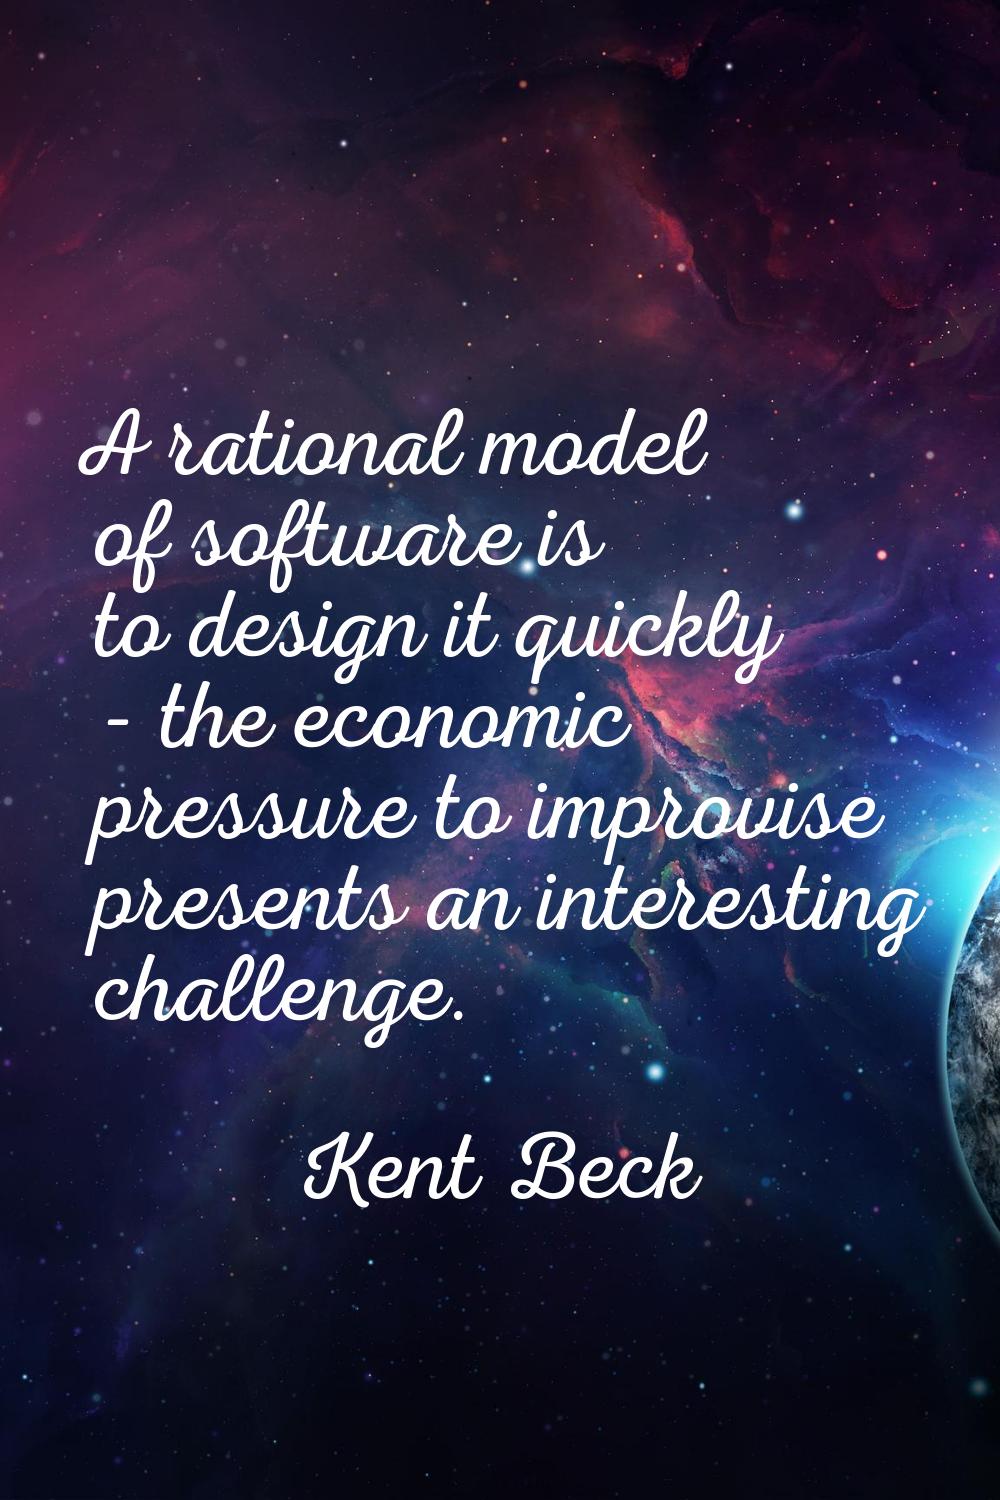 A rational model of software is to design it quickly - the economic pressure to improvise presents 